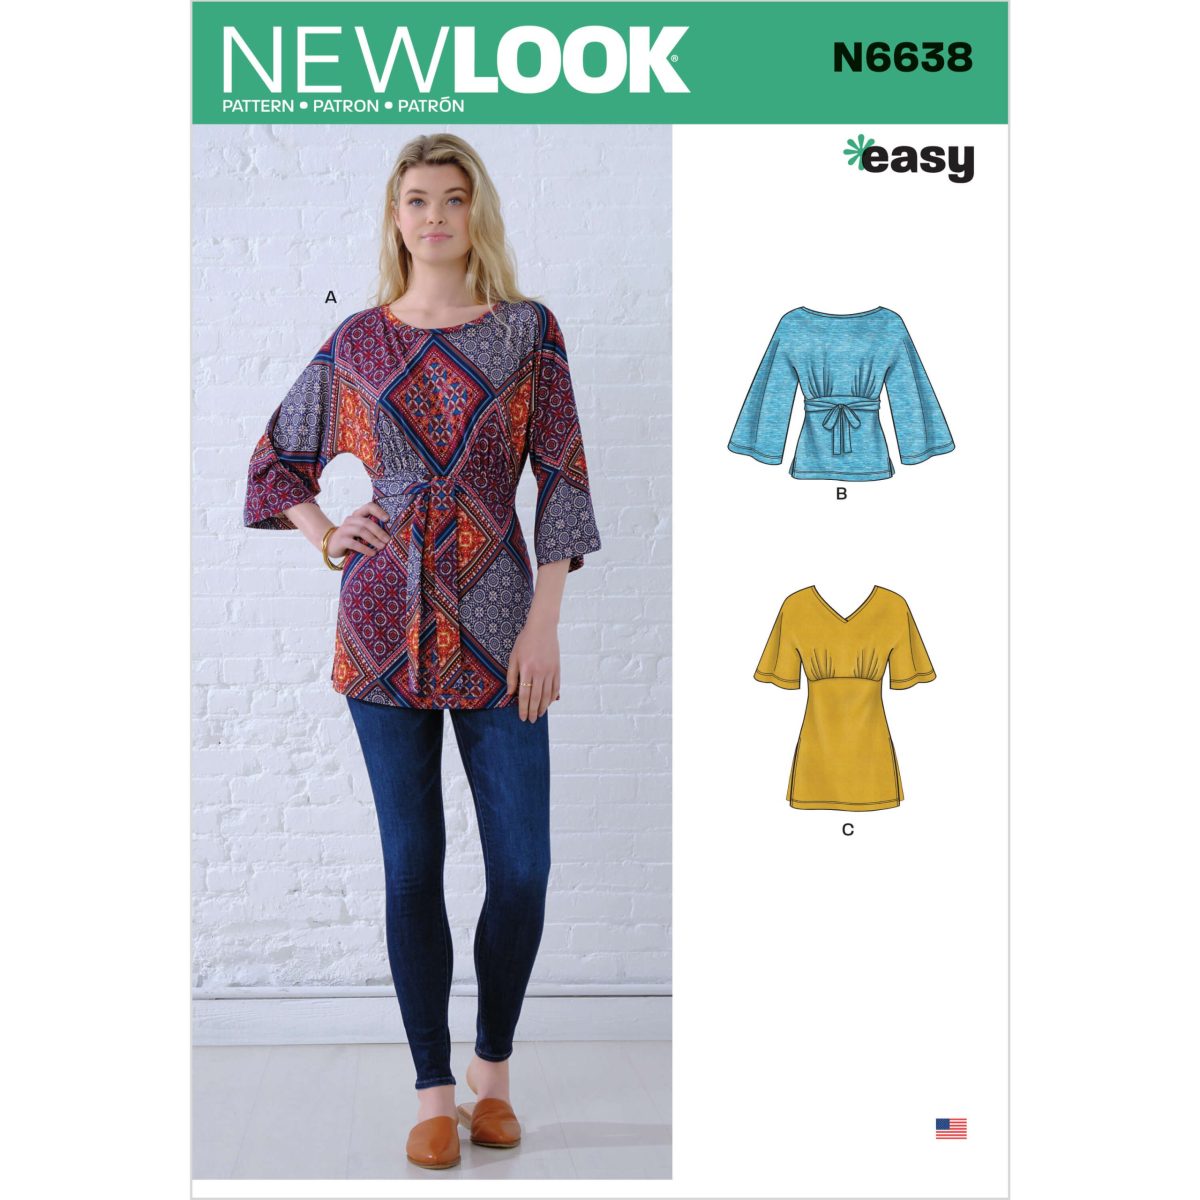 New Look Sewing Pattern N6638 Misses' Knit Tops